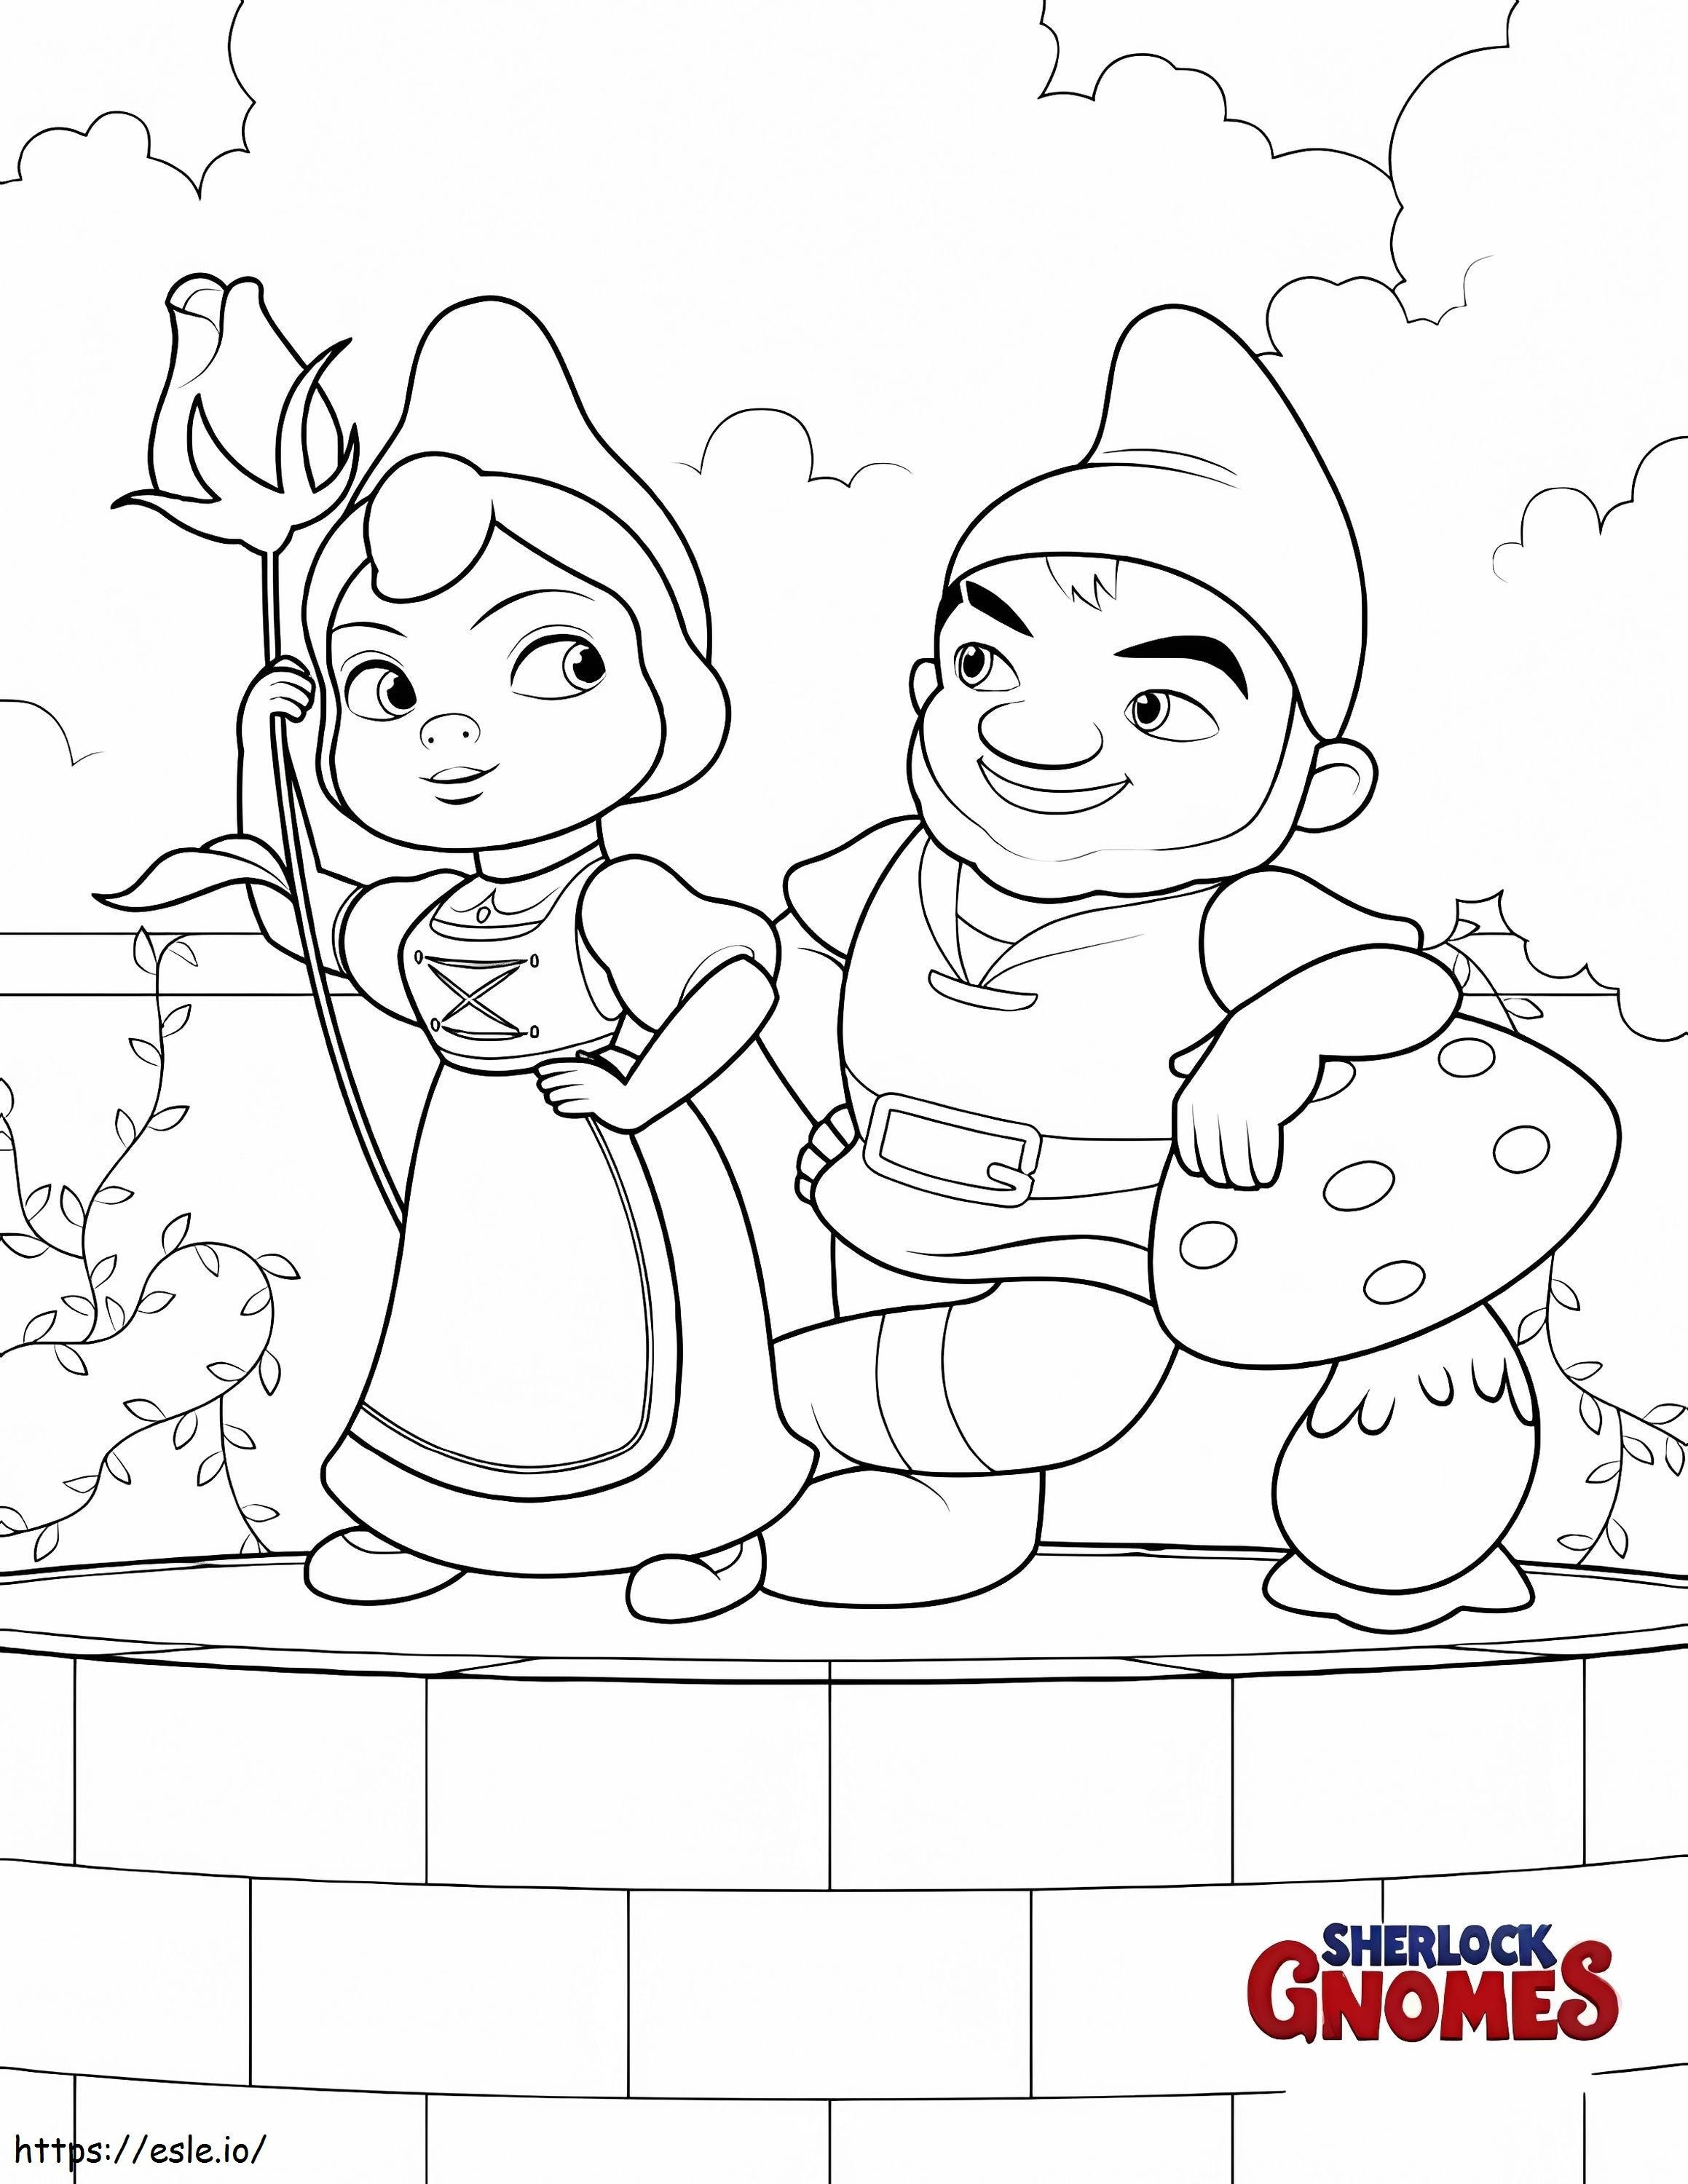 1532050383 Juliet And Gnomeo A4 coloring page